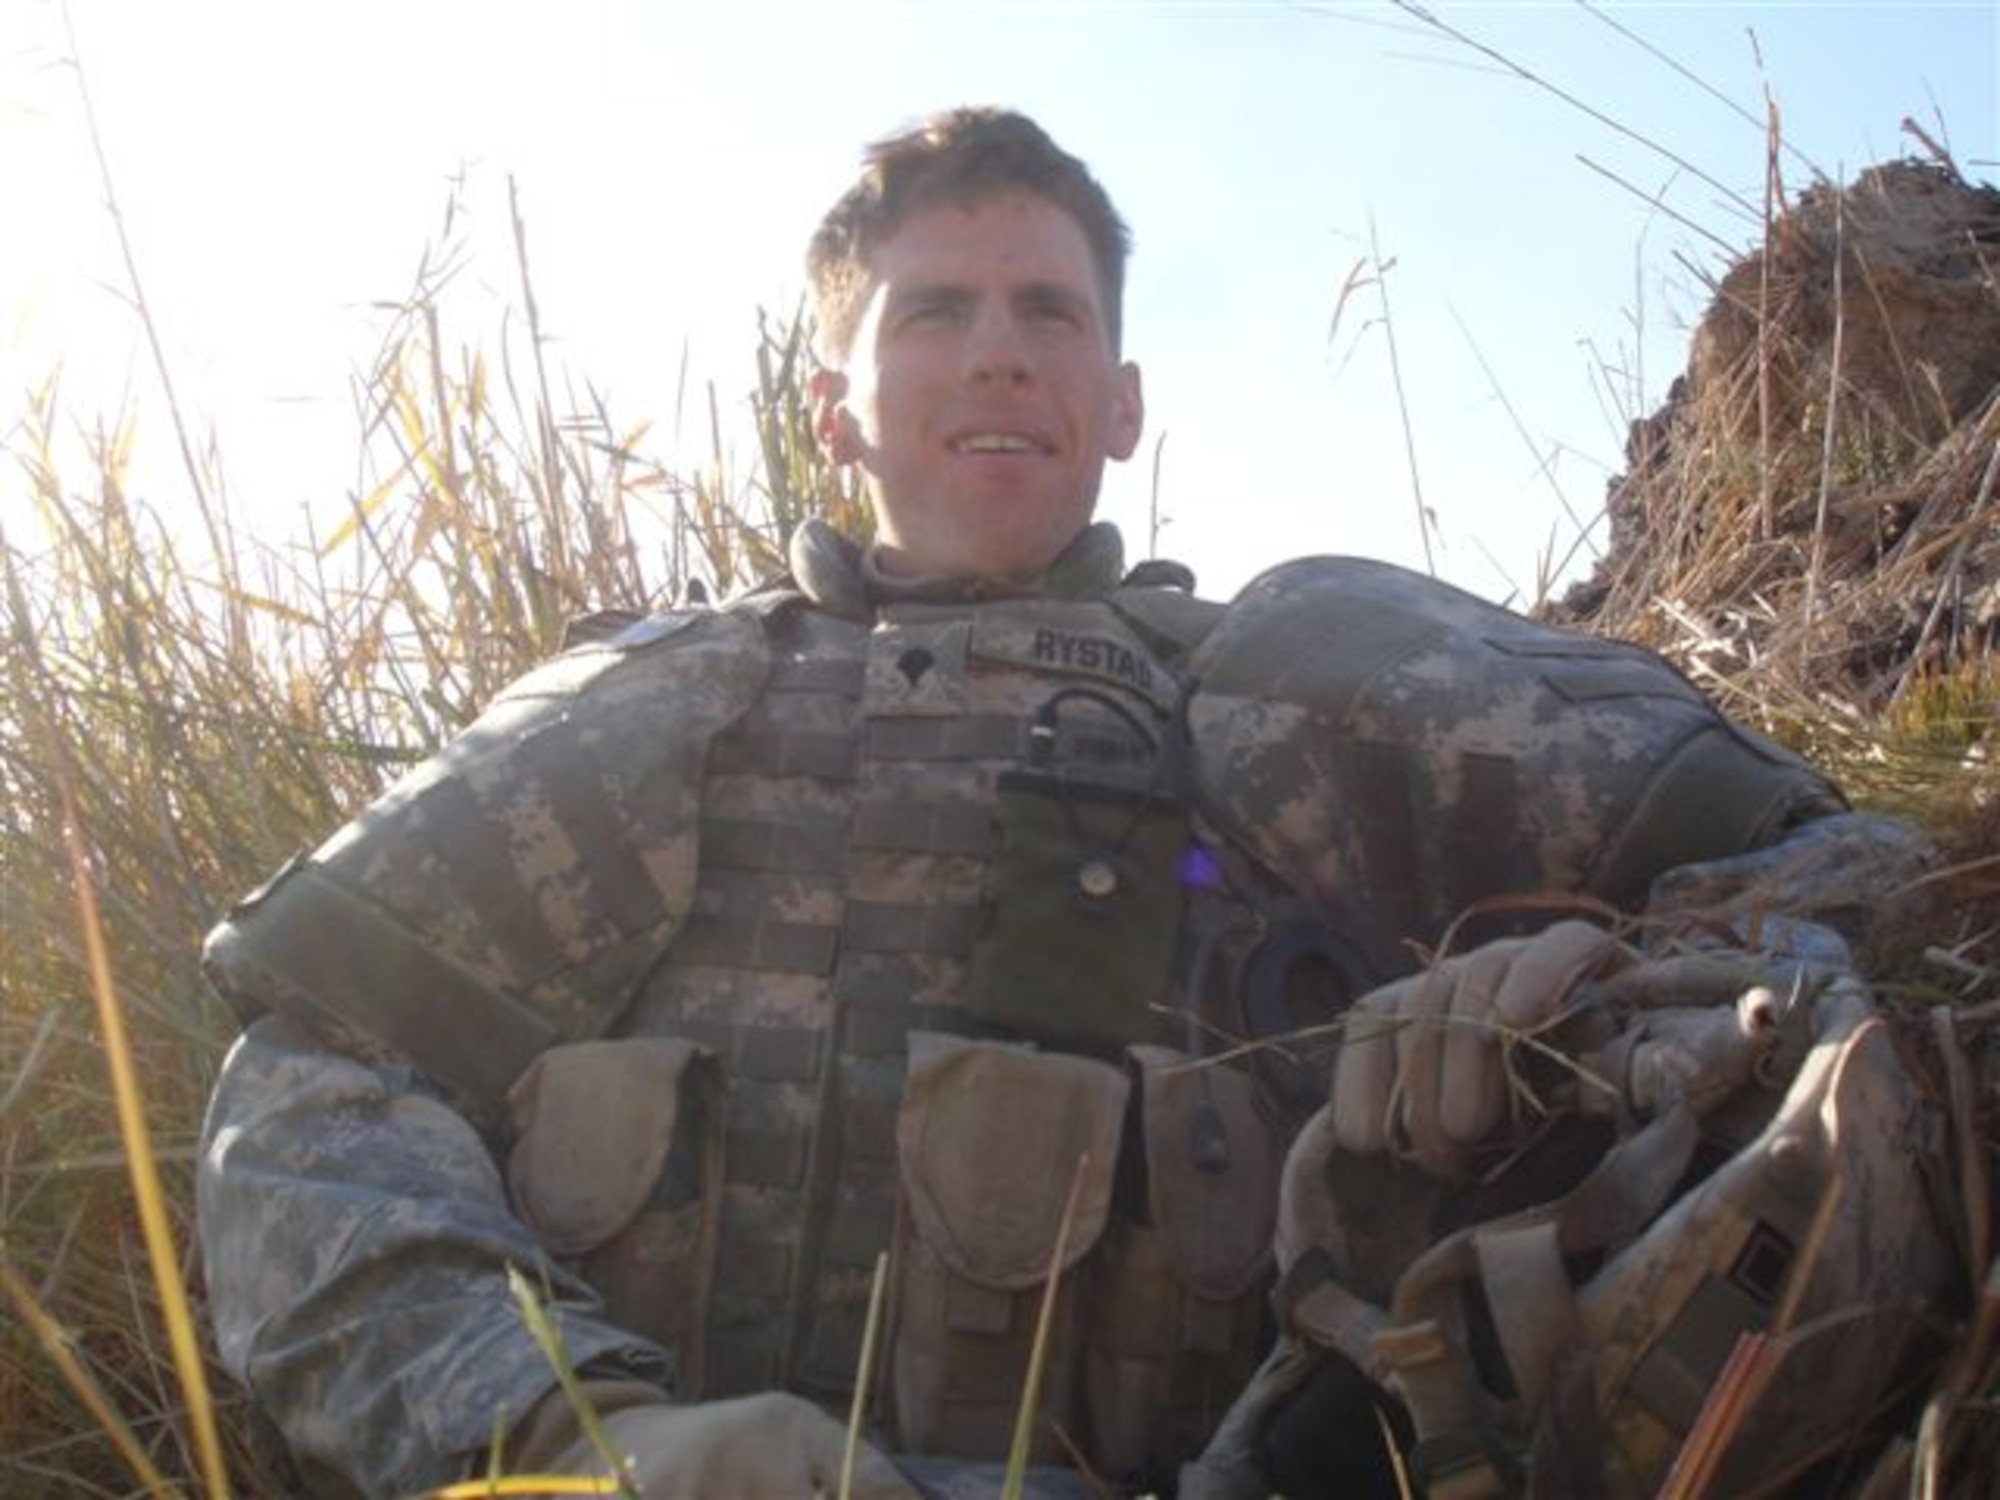 Pictured is Corey J. Rystad baring the rank of an Army specialist. Sgt. Rystad, age 20, of Red Lake Falls was killed in combat while traveling on a patrol mission near Fallujah, Iraq, after an improvised explosive device detonated near his vehicle on Dec. 2, 2006. His childhood friend from Red Lake Falls, Minn., Kurt Philion, honors his memory by carrying a 3 by 5 foot American flag while running races with a T-shirt bearing this image of him. (File photo courtesy of Minnesota National Guard)
